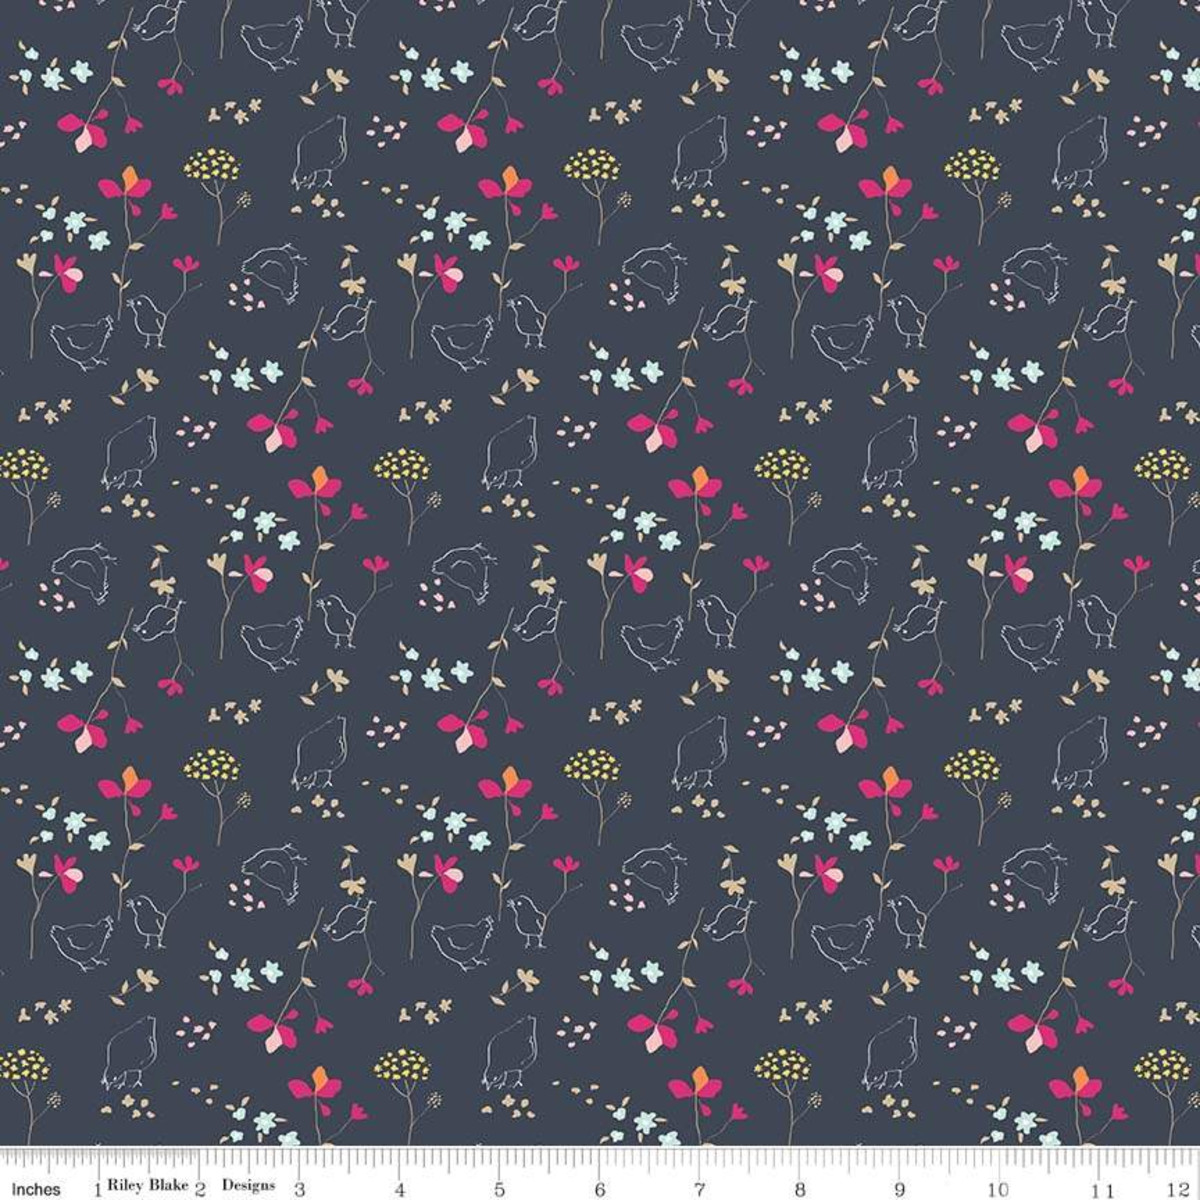 Riley Blake Fabric - Minki Kim - Someday - Chickens Navy - Quilters Cotton